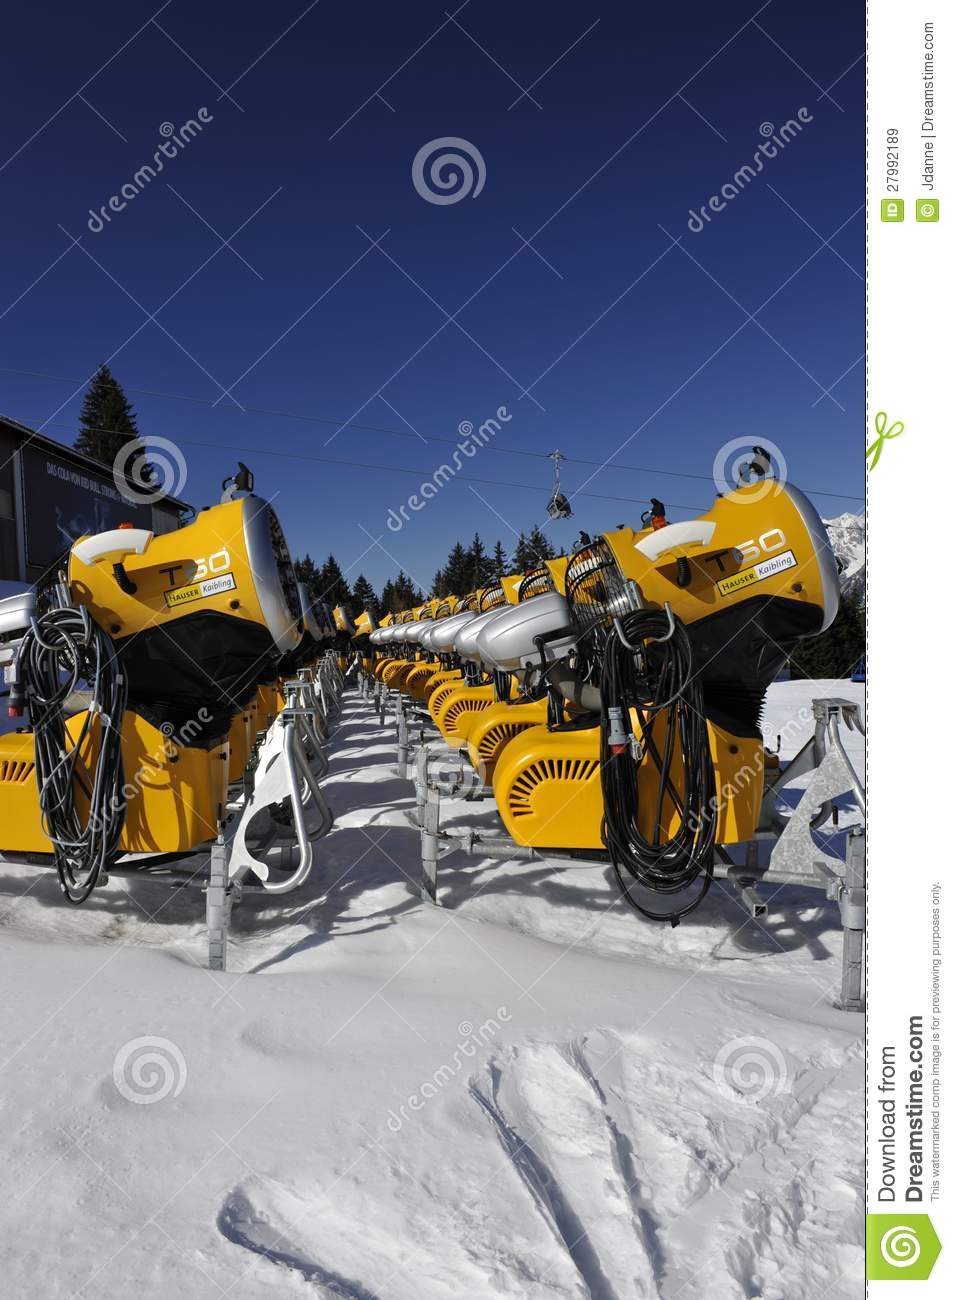 Mobile Snow Cannons Editorial Stock Image   Image  27992189